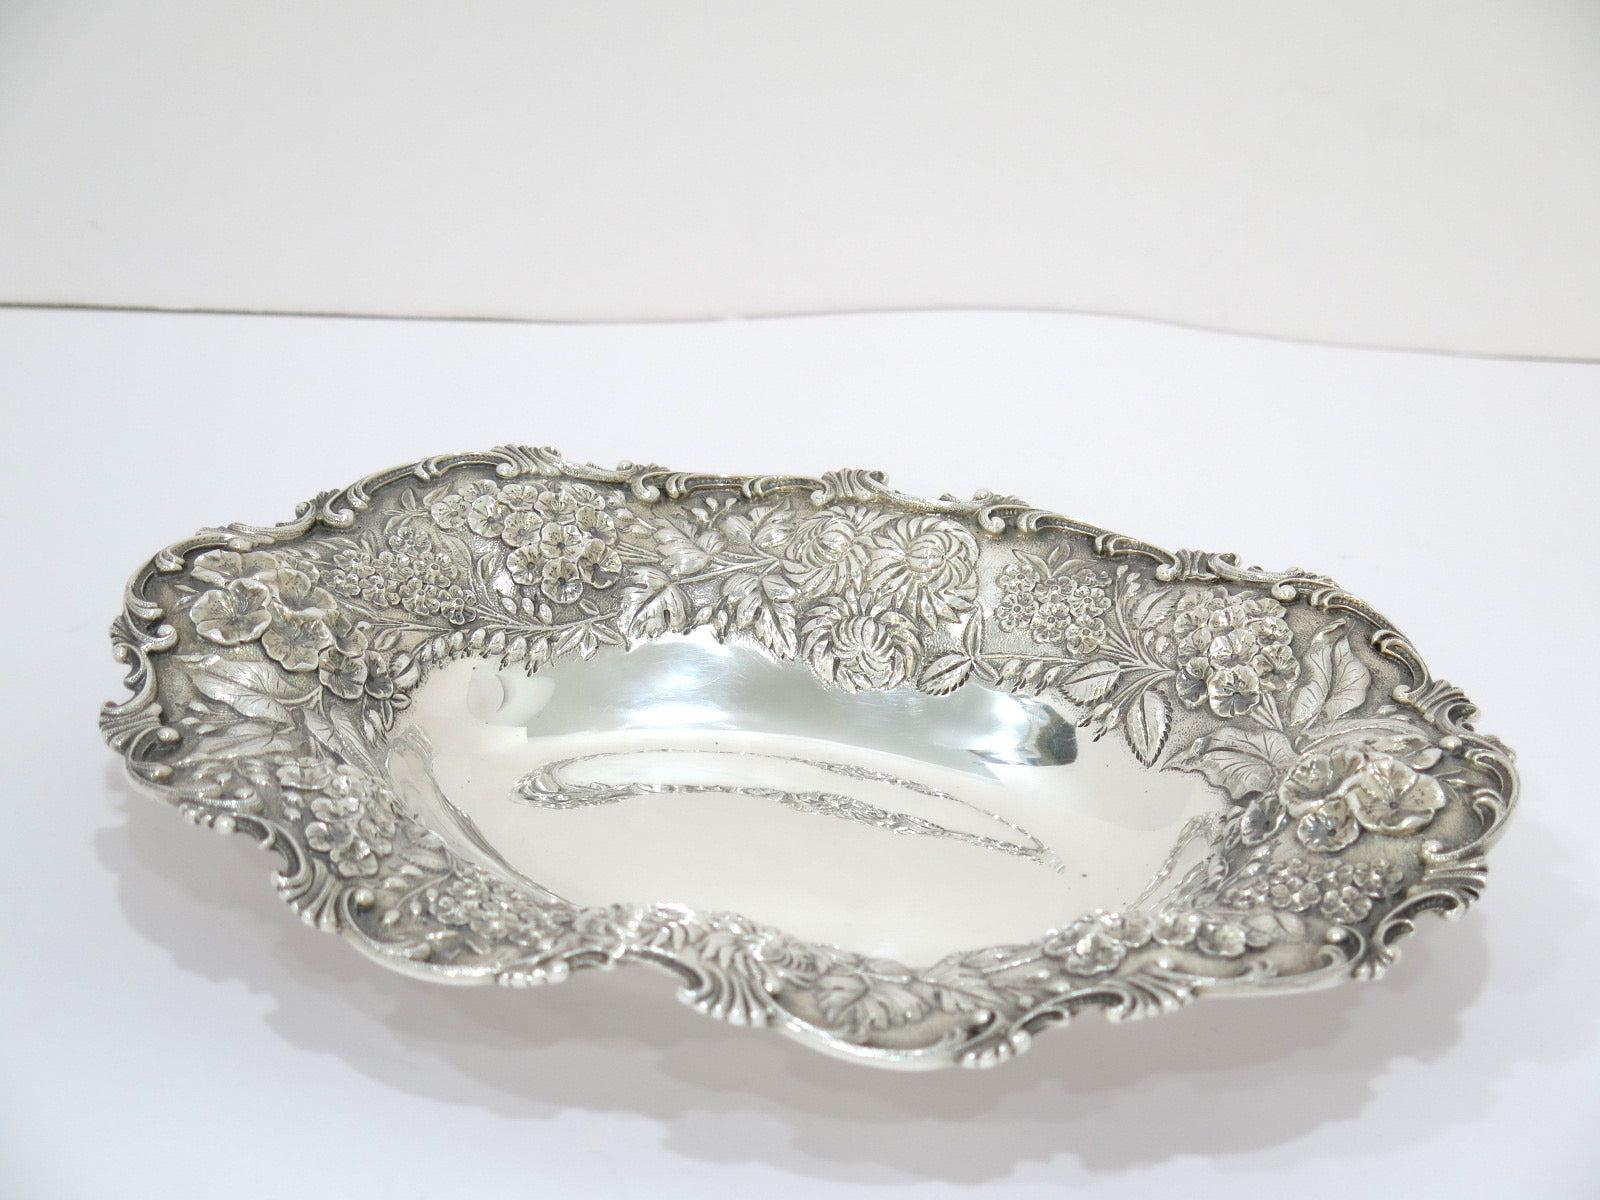 American Sterling Silver S. Kirk & Son Antique Floral Repousse Oval Serving Bowl